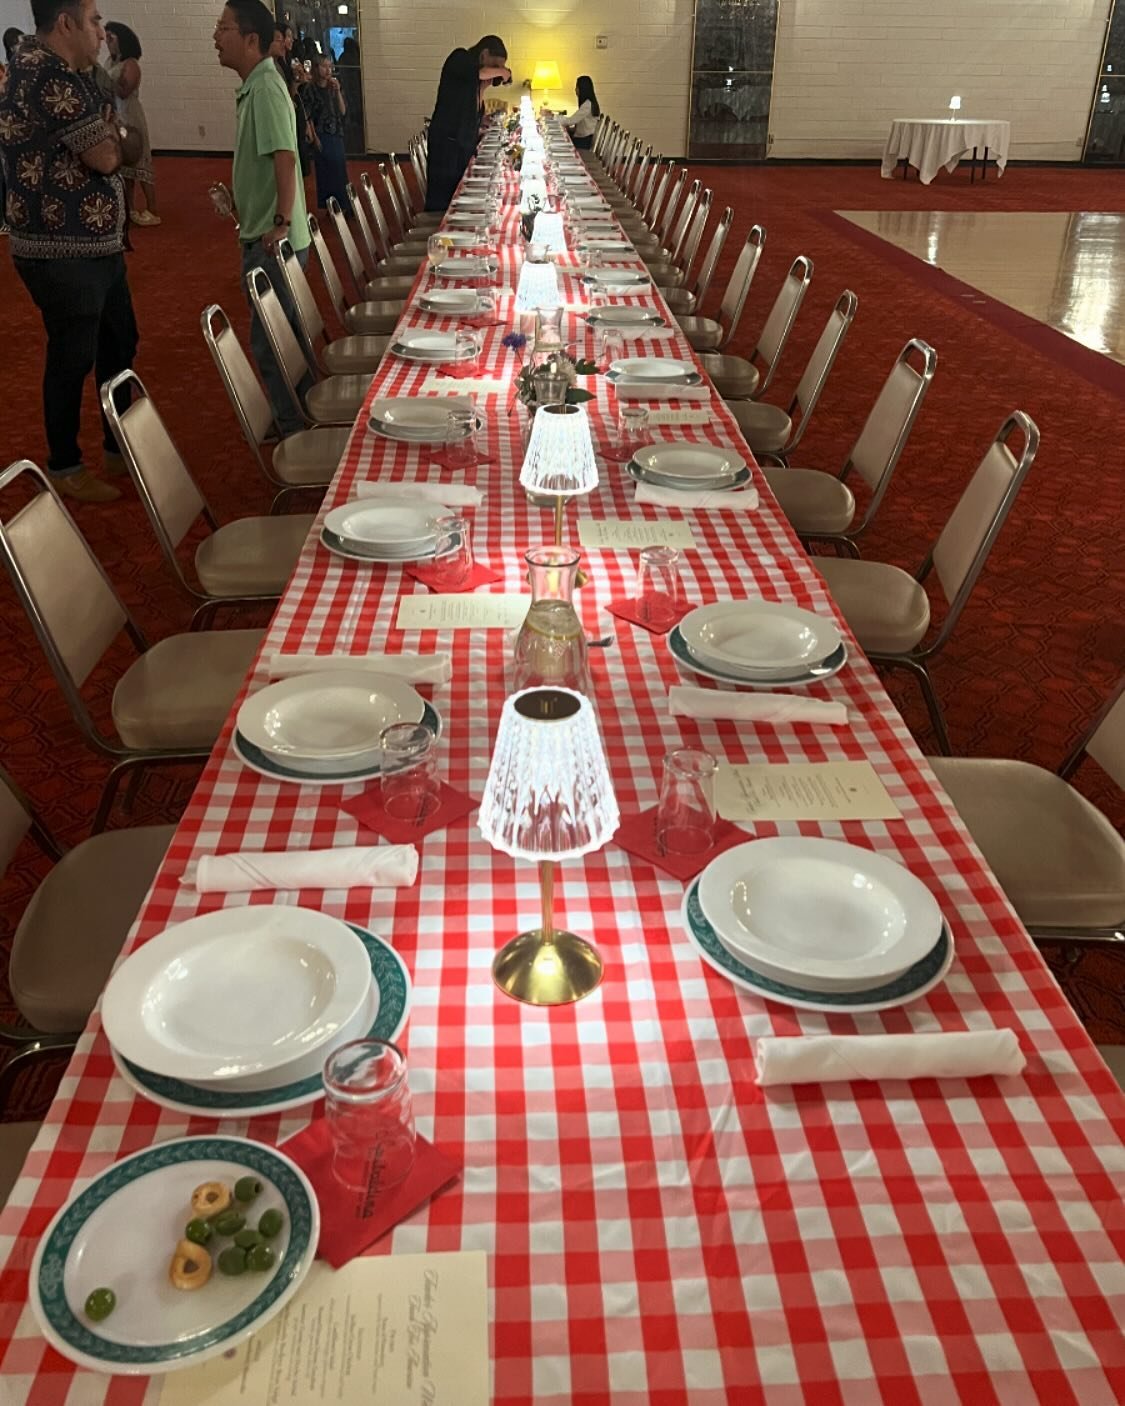 📓Teacher Appreciation Week! ✏️

This photo was taken yesterday afternoon, right before we opened the doors to a very special luncheon for @teachforamerica.

With a gorgeous meal by Chef @amandajlasagna, the Los Angeles leadership team also had a sal